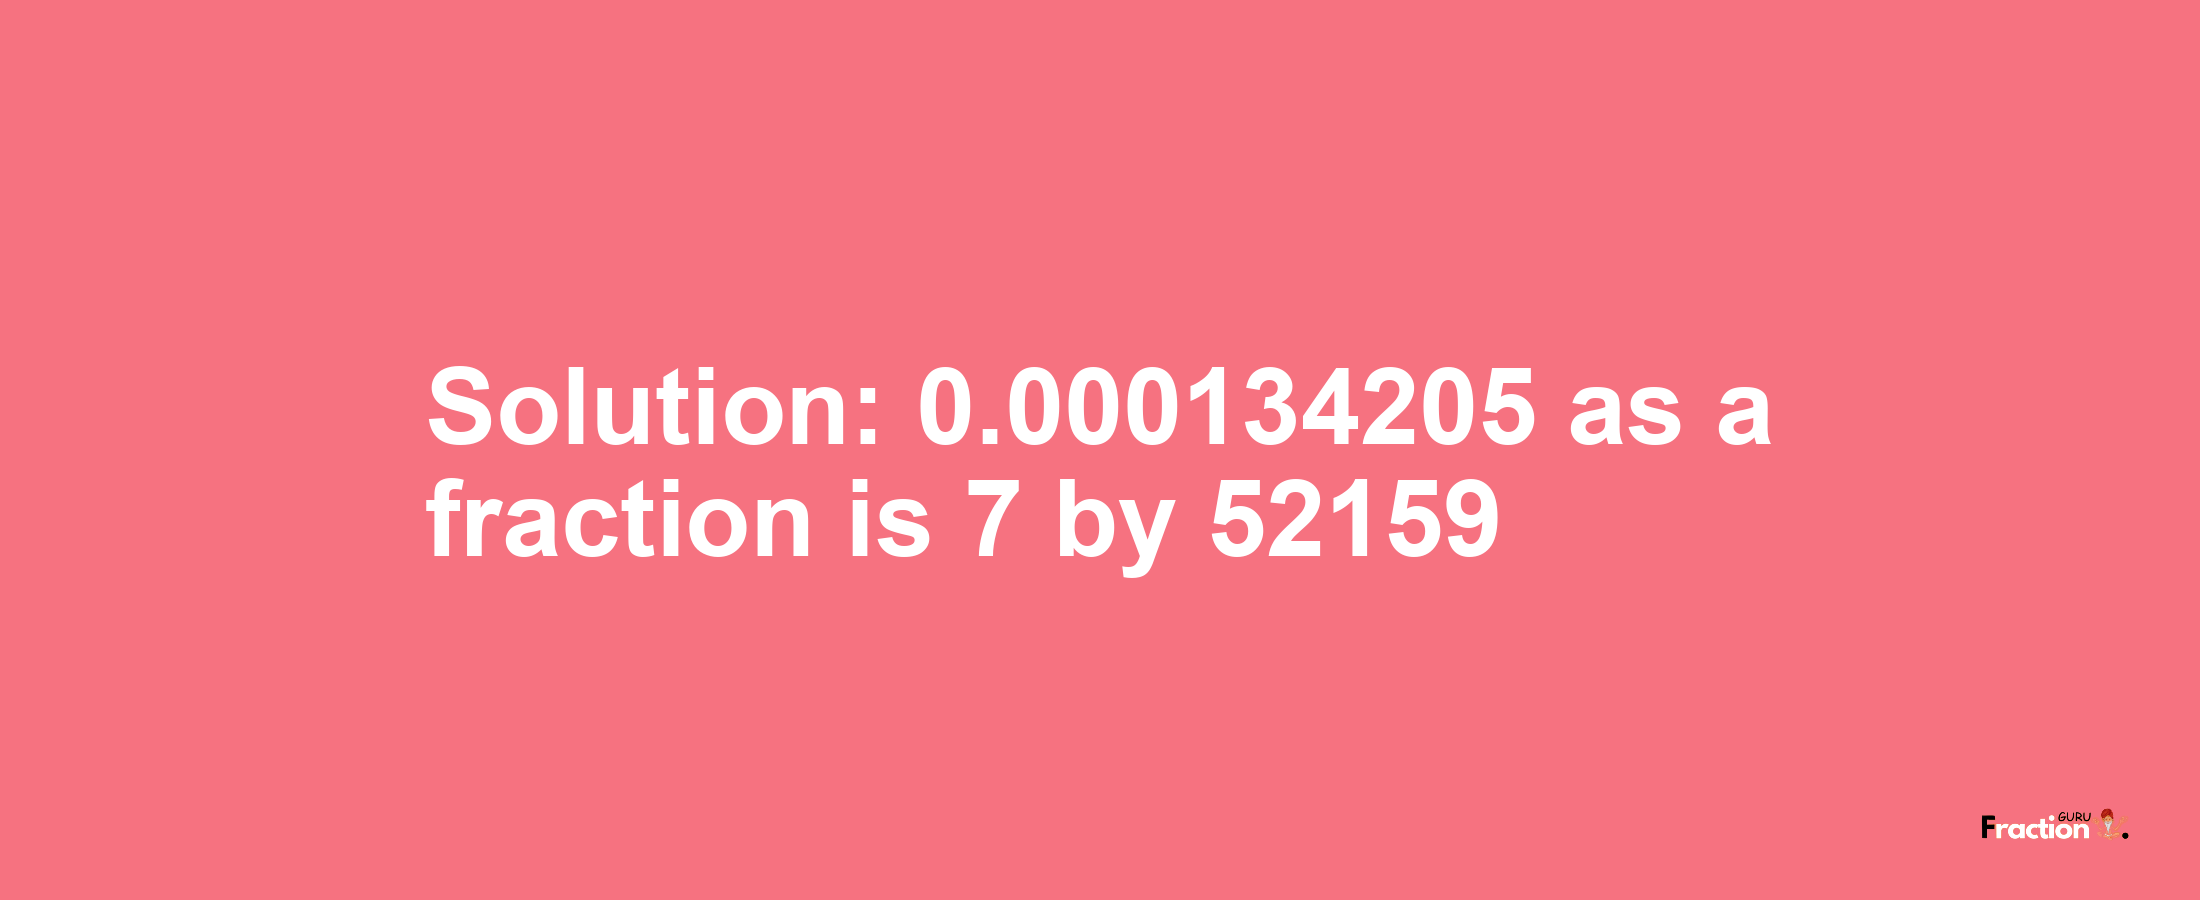 Solution:0.000134205 as a fraction is 7/52159